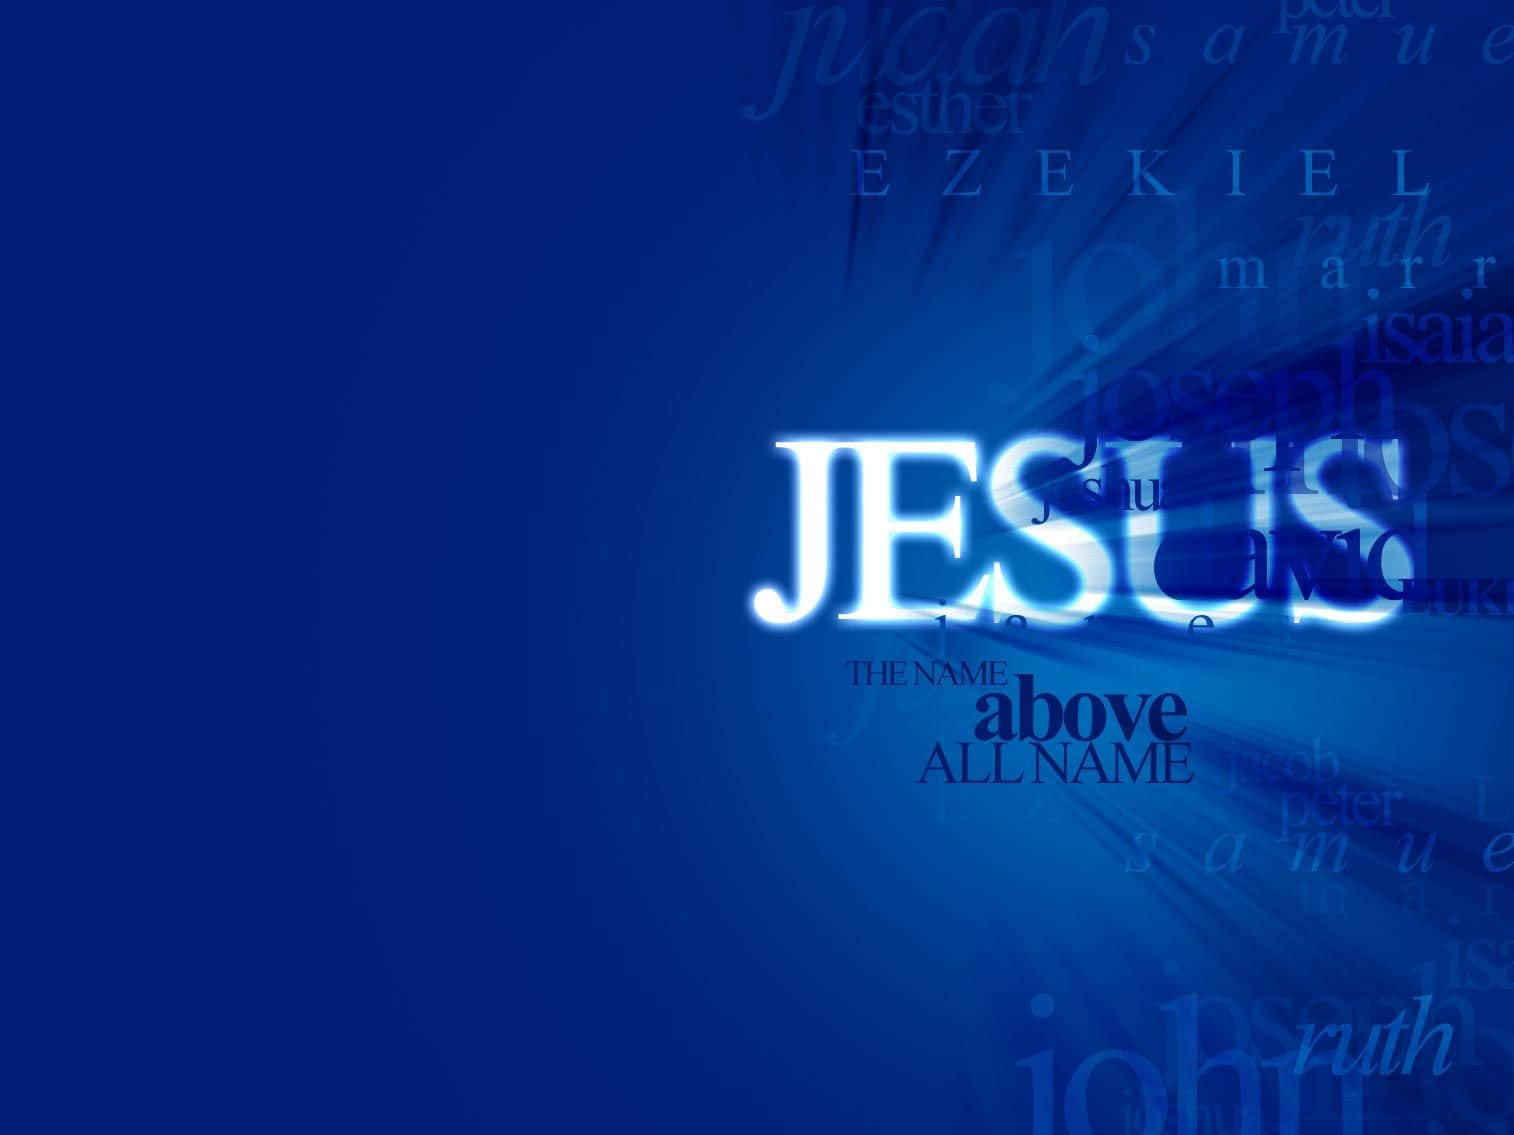 "Jesus, the Son of God and our Savior" Wallpaper